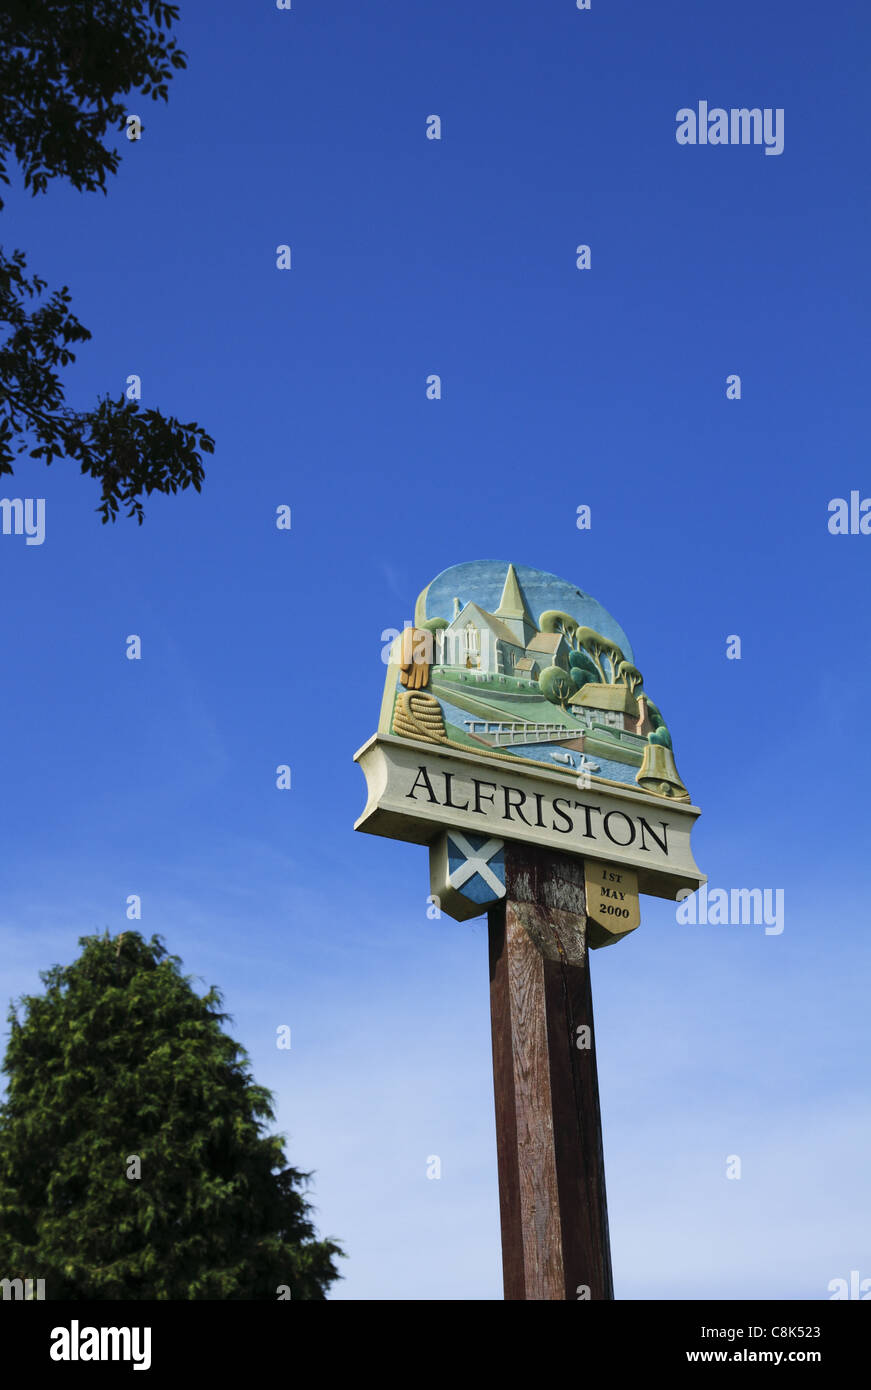 The village sign depicting the church and river cuckmere at Alfriston, East Sussex, England. Stock Photo